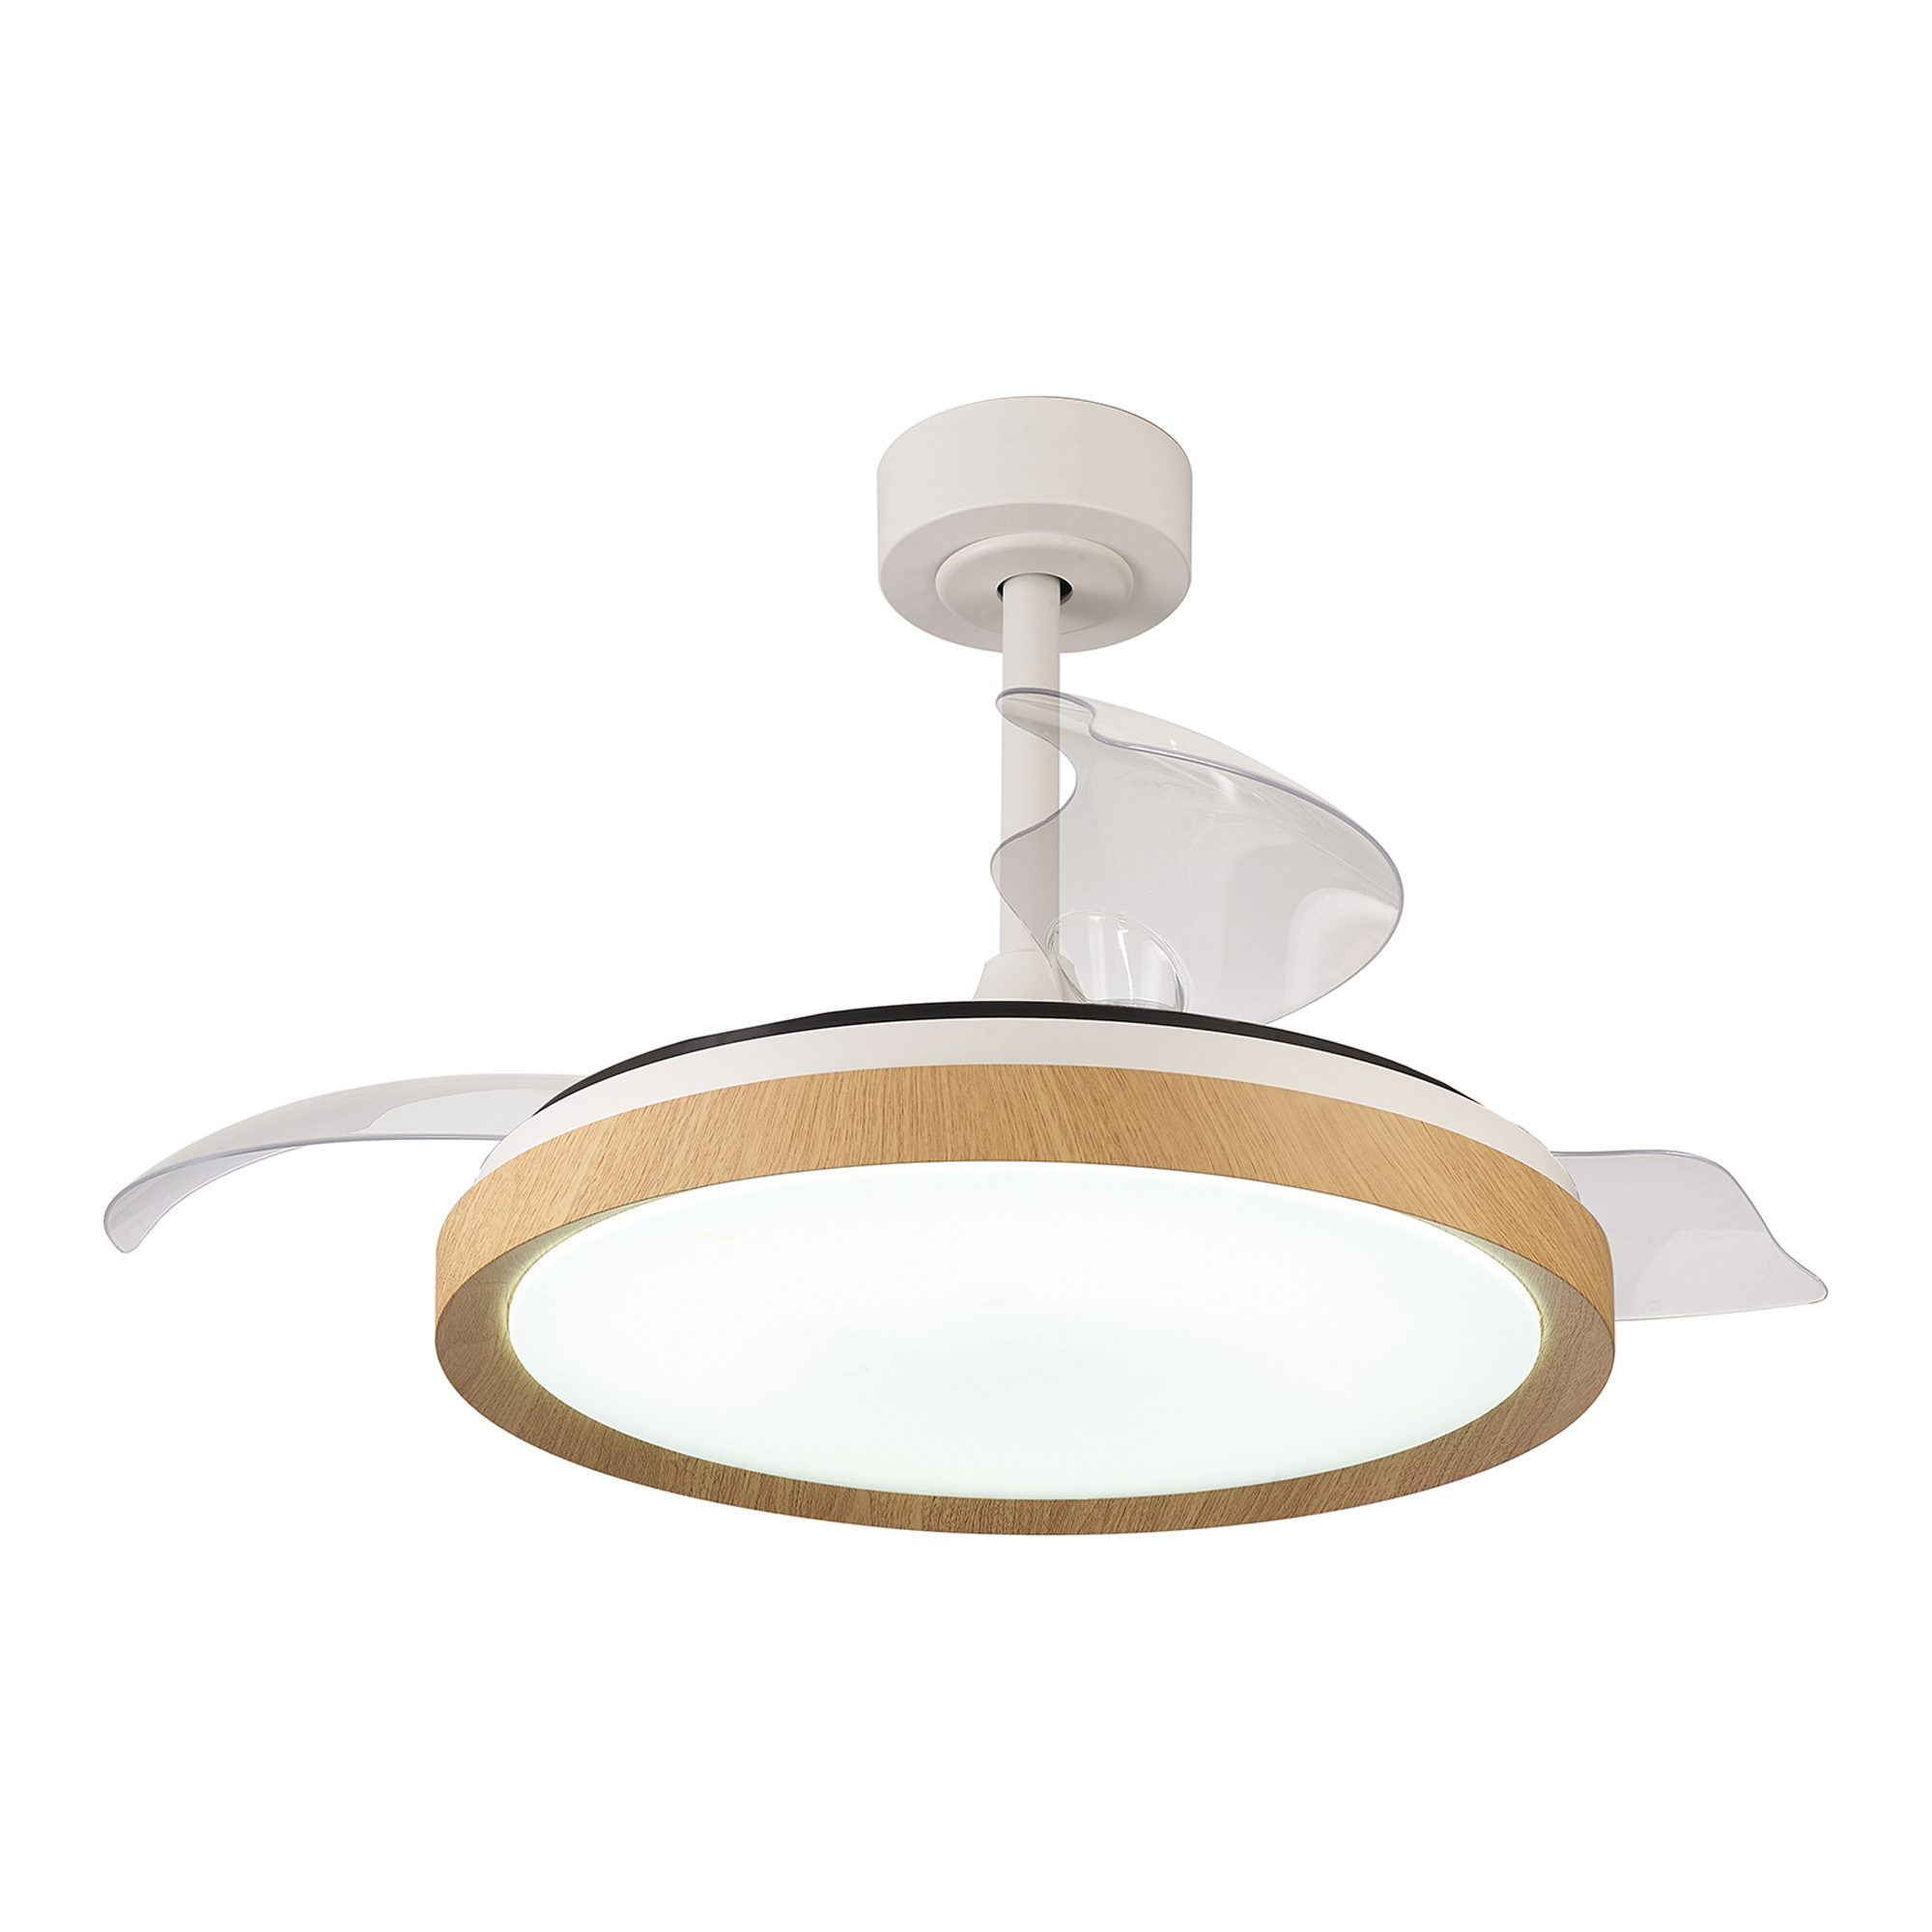 M8827  Mistral 50W LED Dimmable Ceiling Light With Built-In 30W DC Fan; 2700-5000K Remote Control; Wood